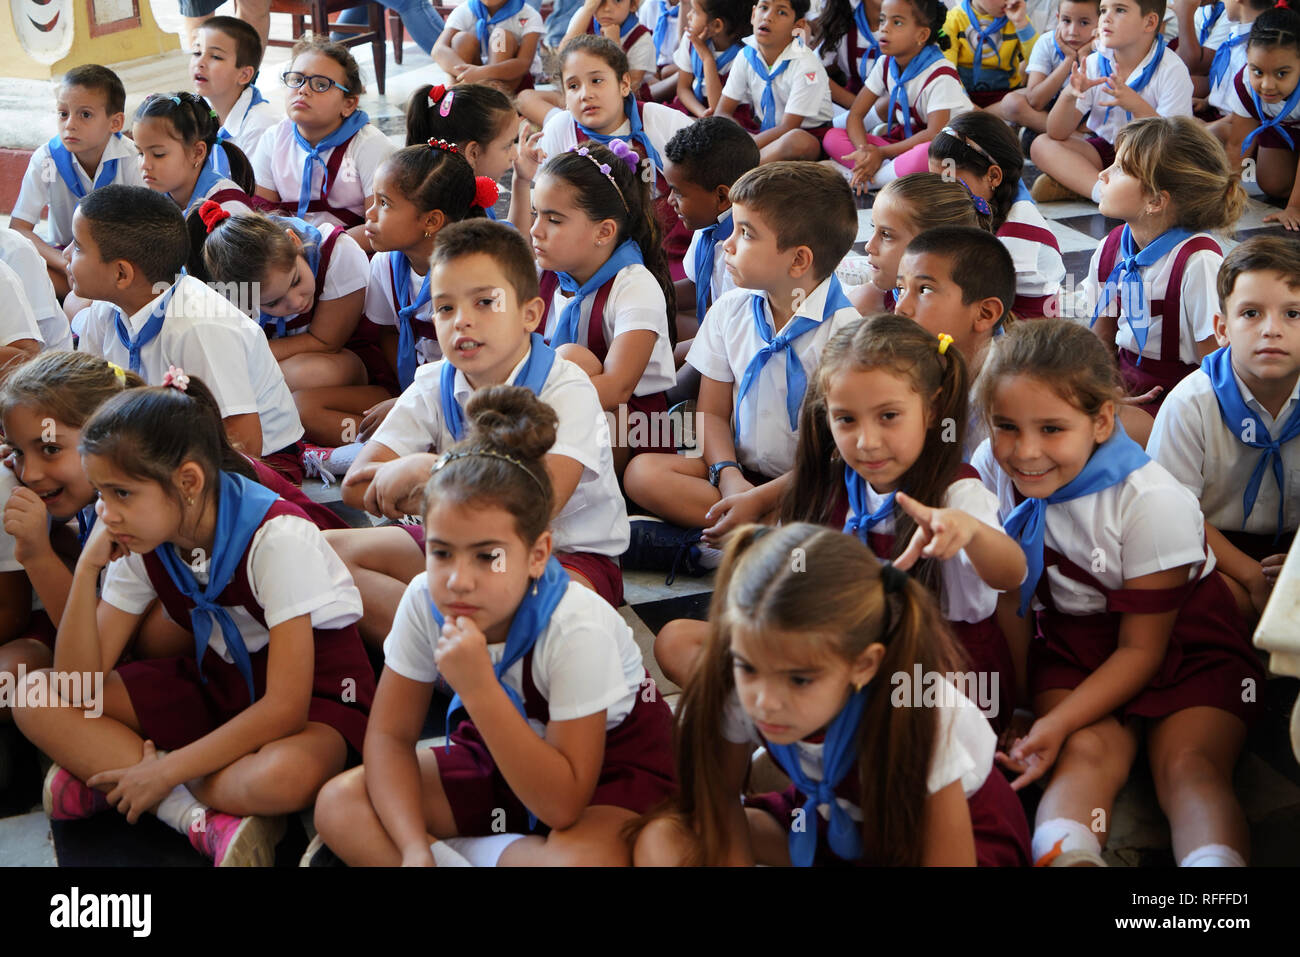 School children on a field trip to a museum  in Trinidad, Cuba  Photo by Dennis Brack Stock Photo